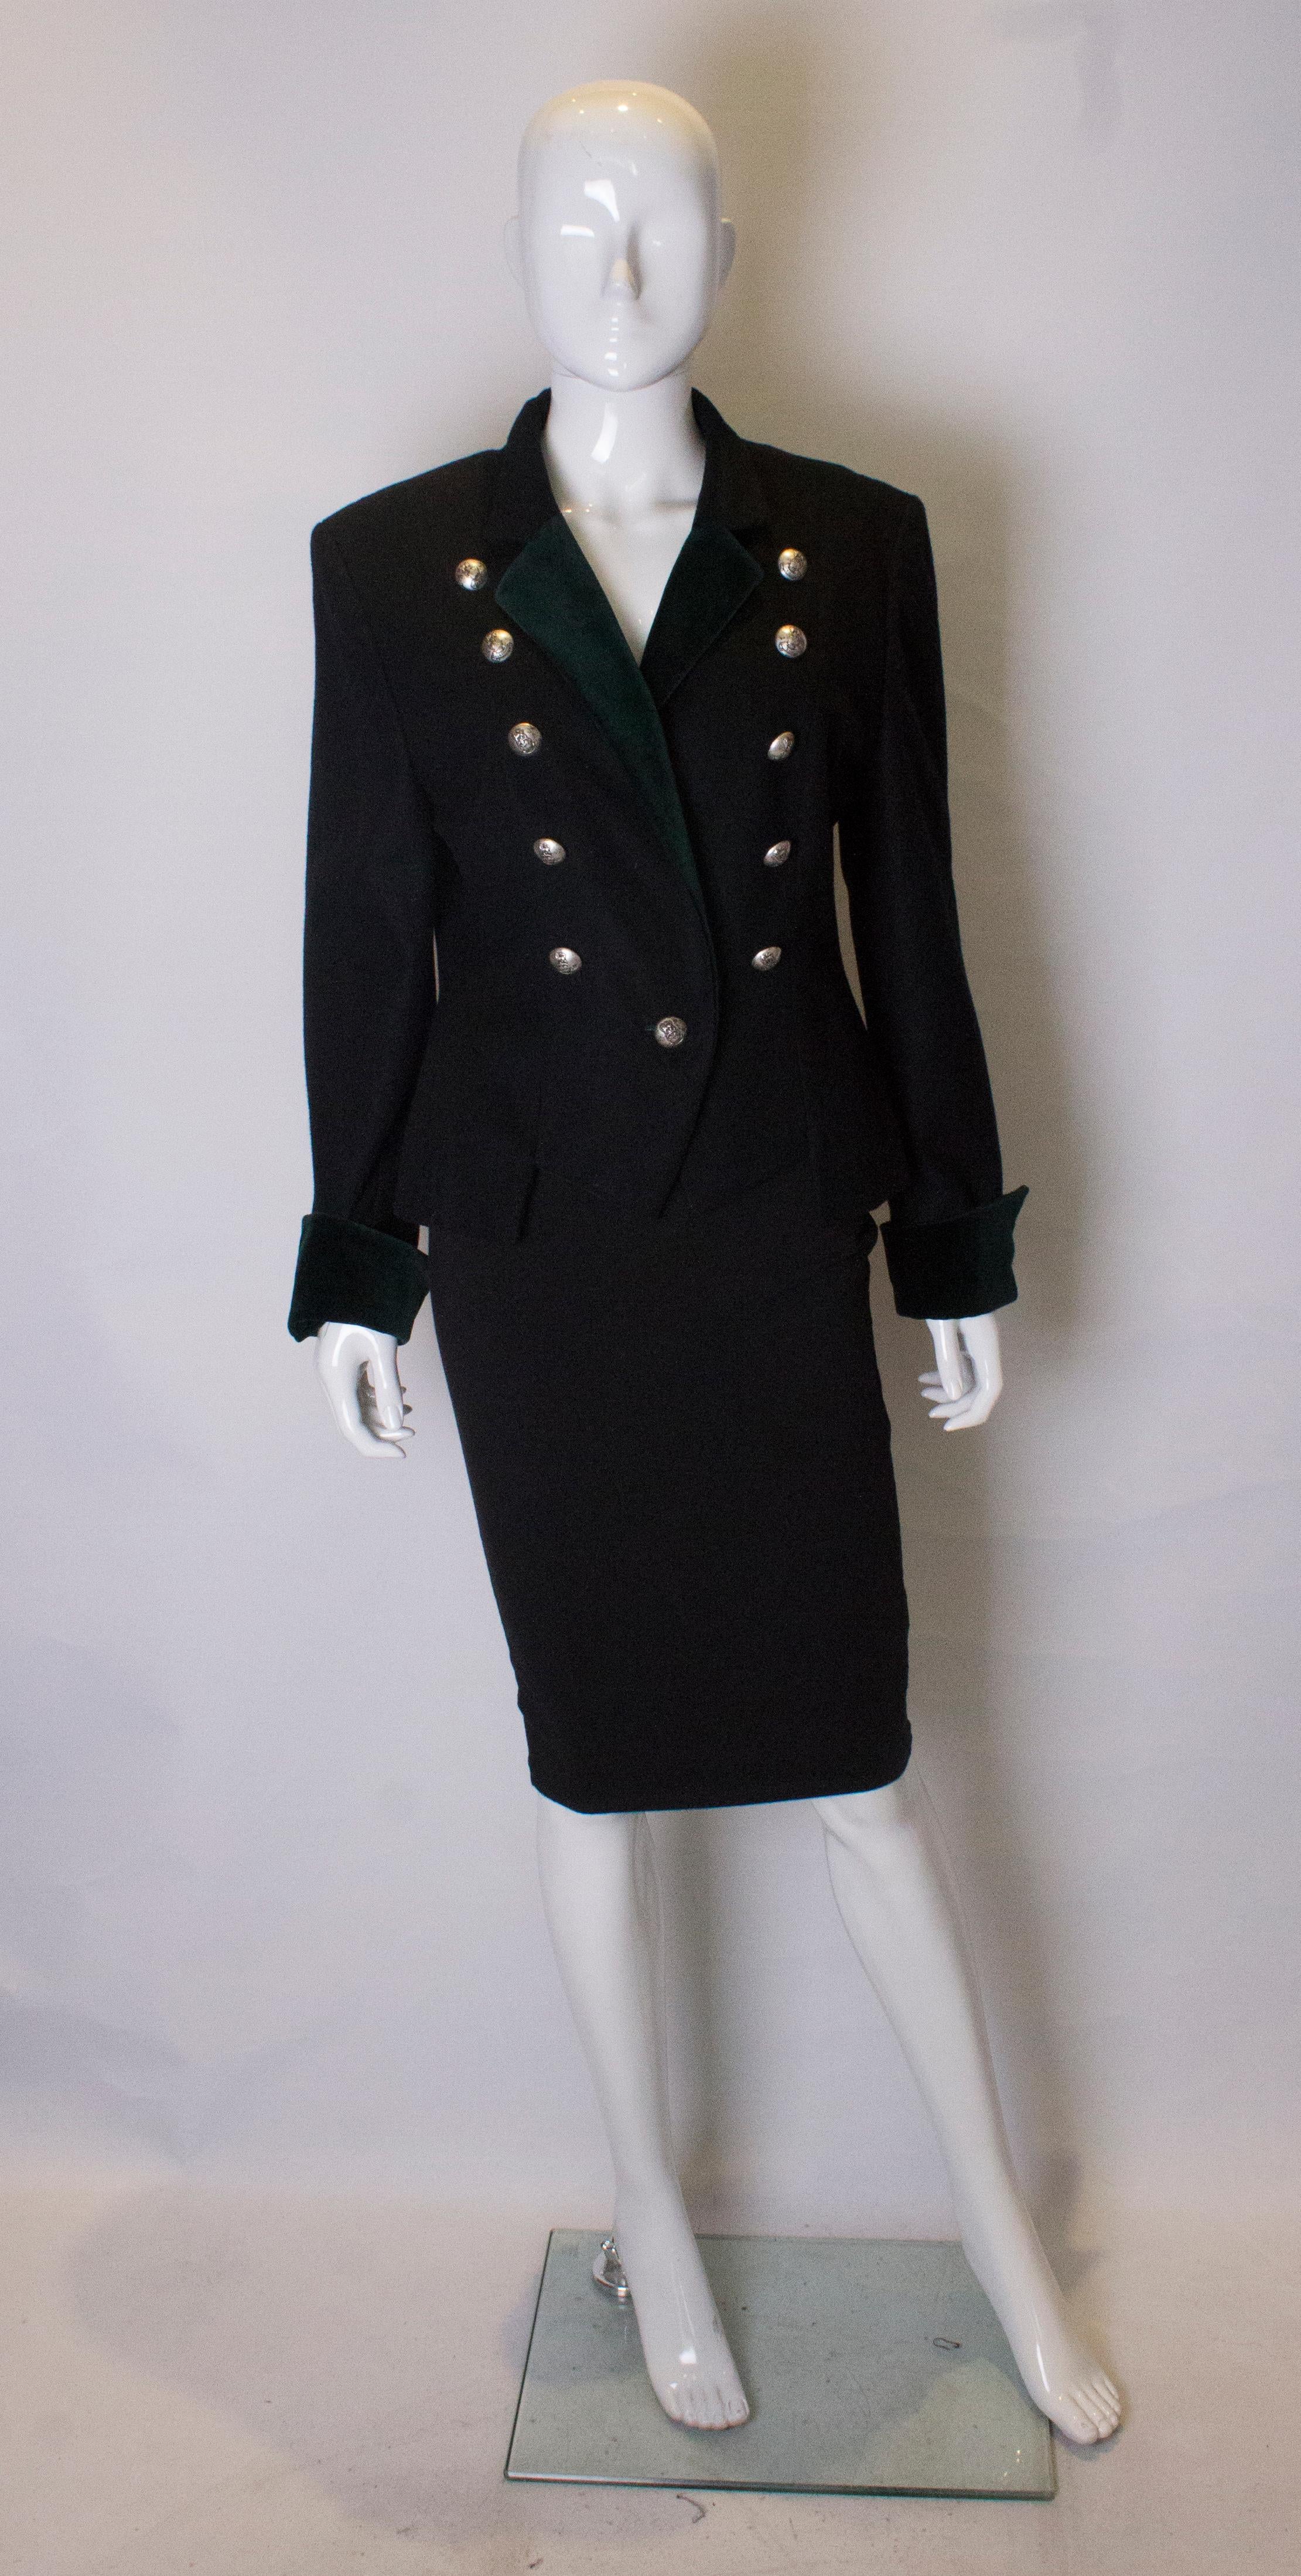 A chic and easy to wear military style jacket by Mondi. The jacket is a wool and cashmere mix with velvet collar and cuffs. It has an interesting cutaway hem, and is fully lined.